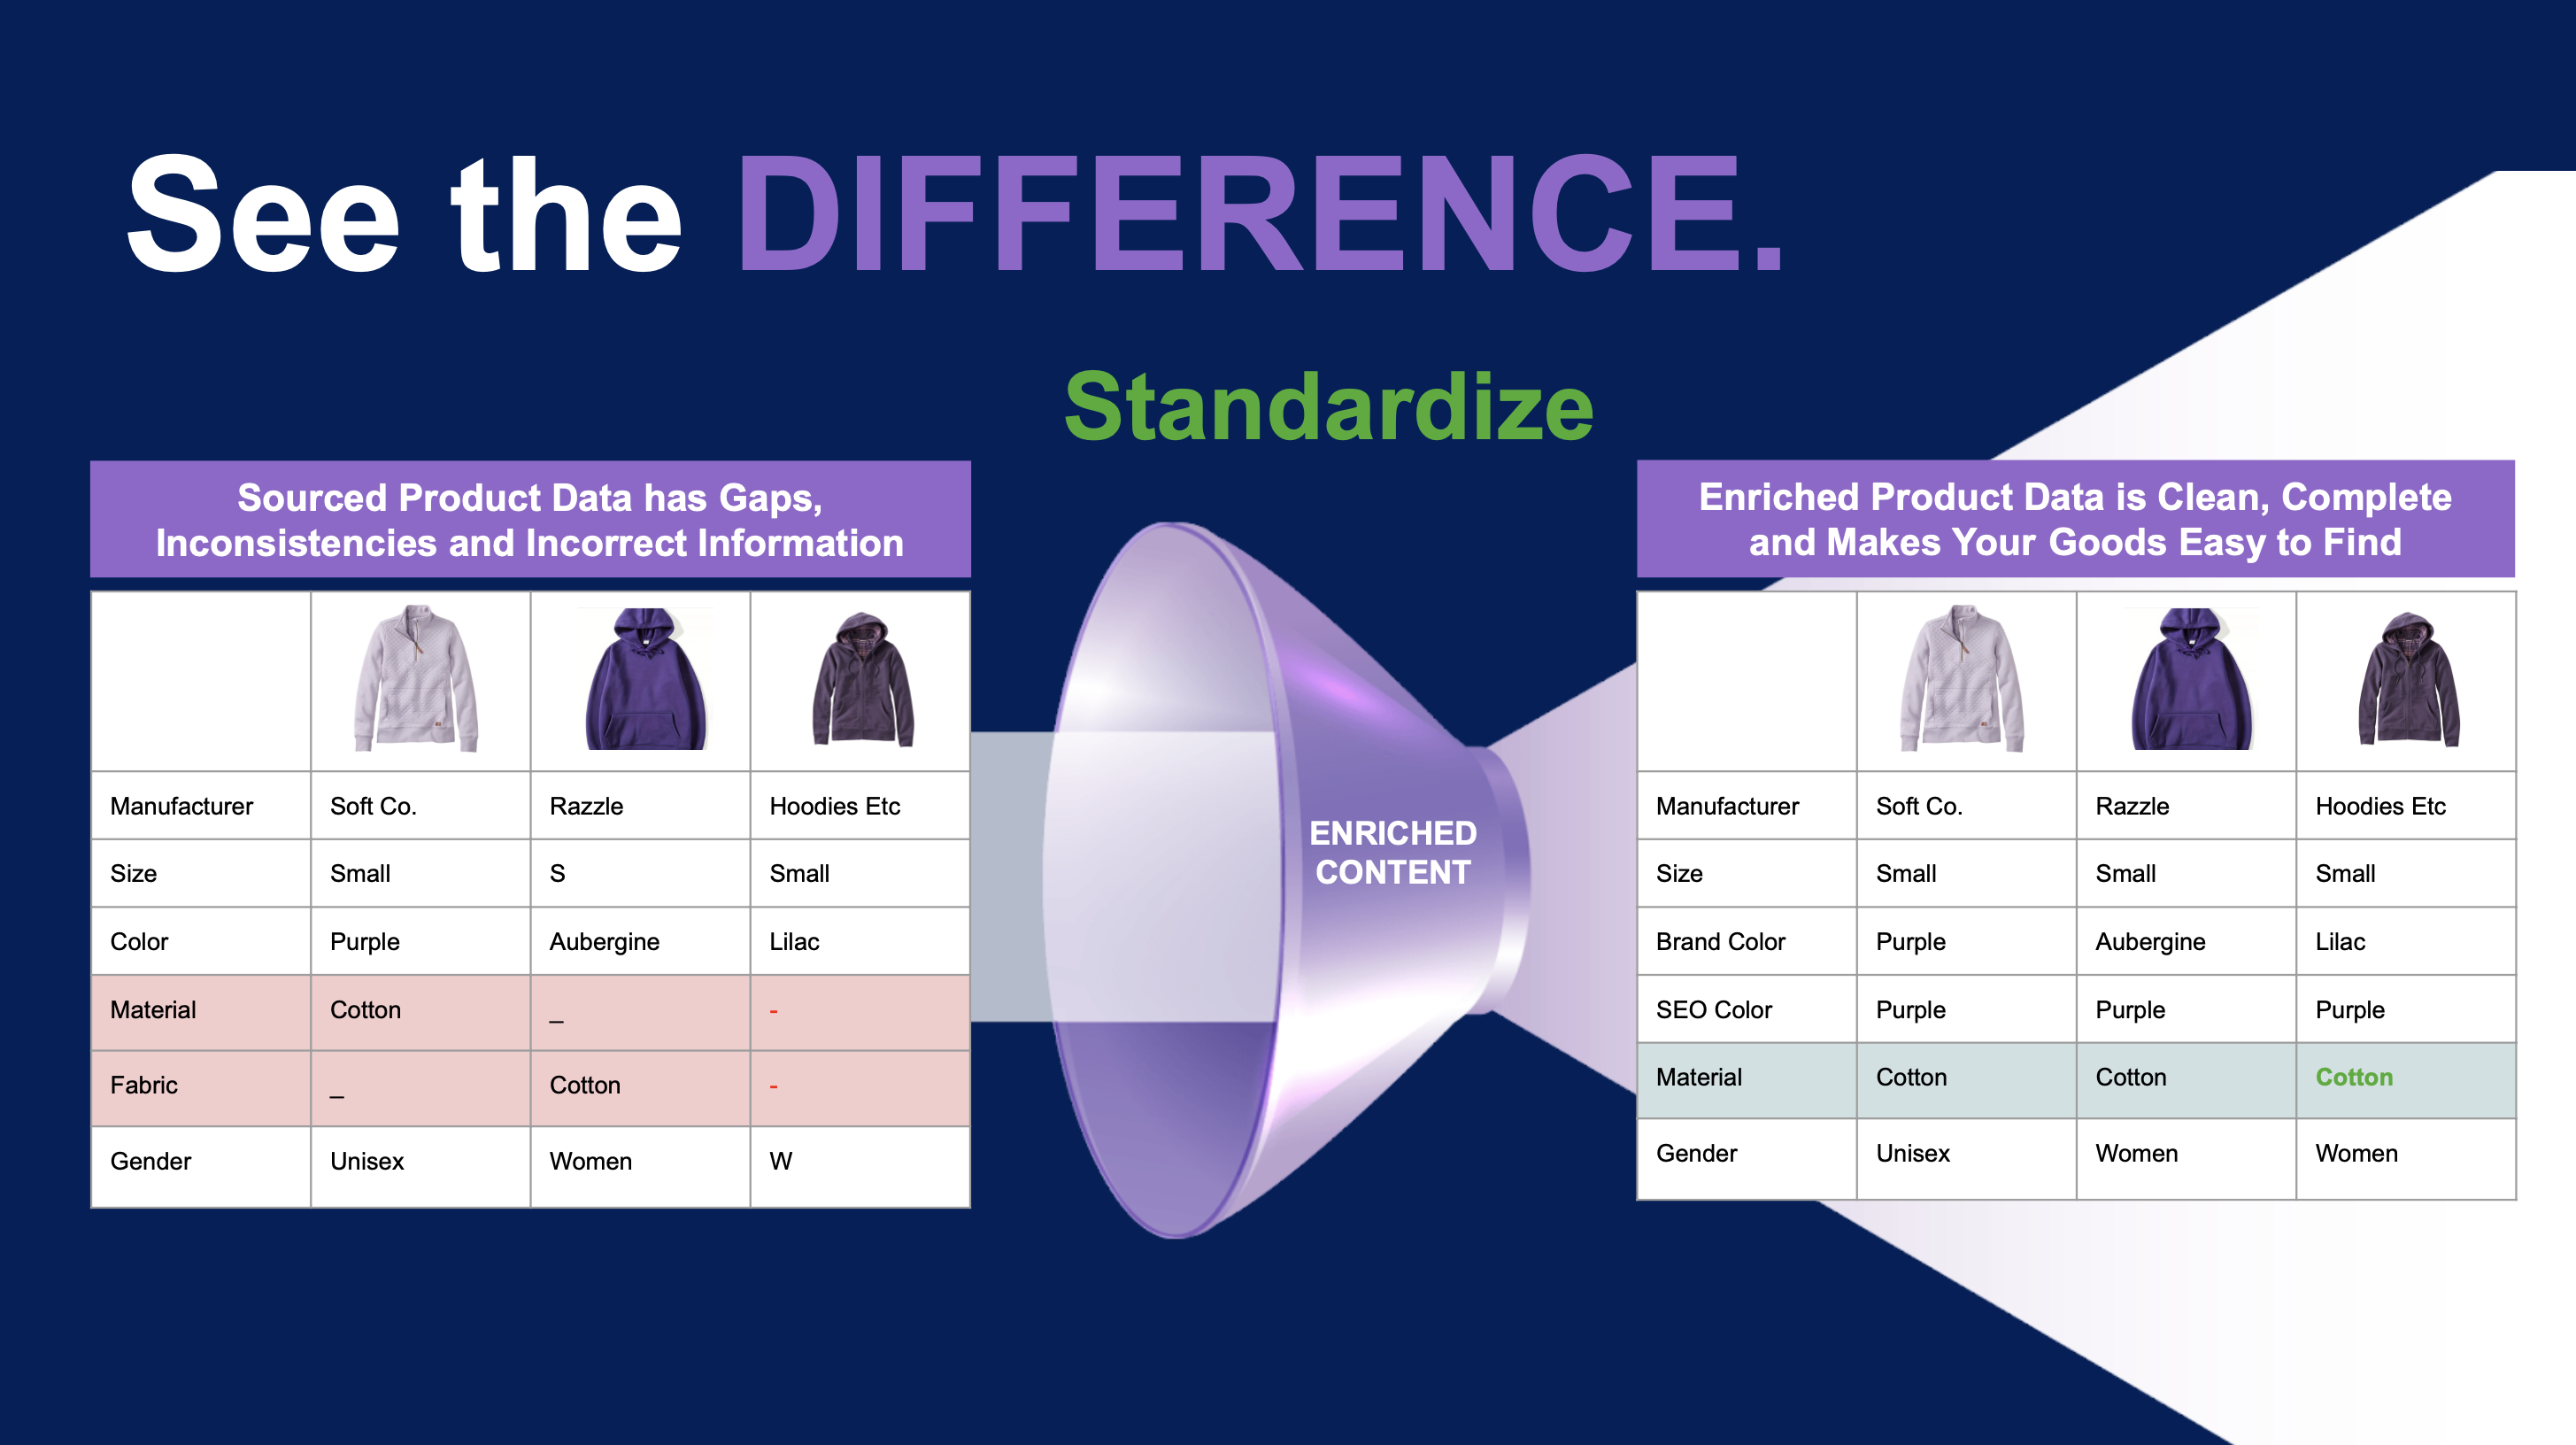 Standardizing the product descriptions helps customers search and compare products more easily. 